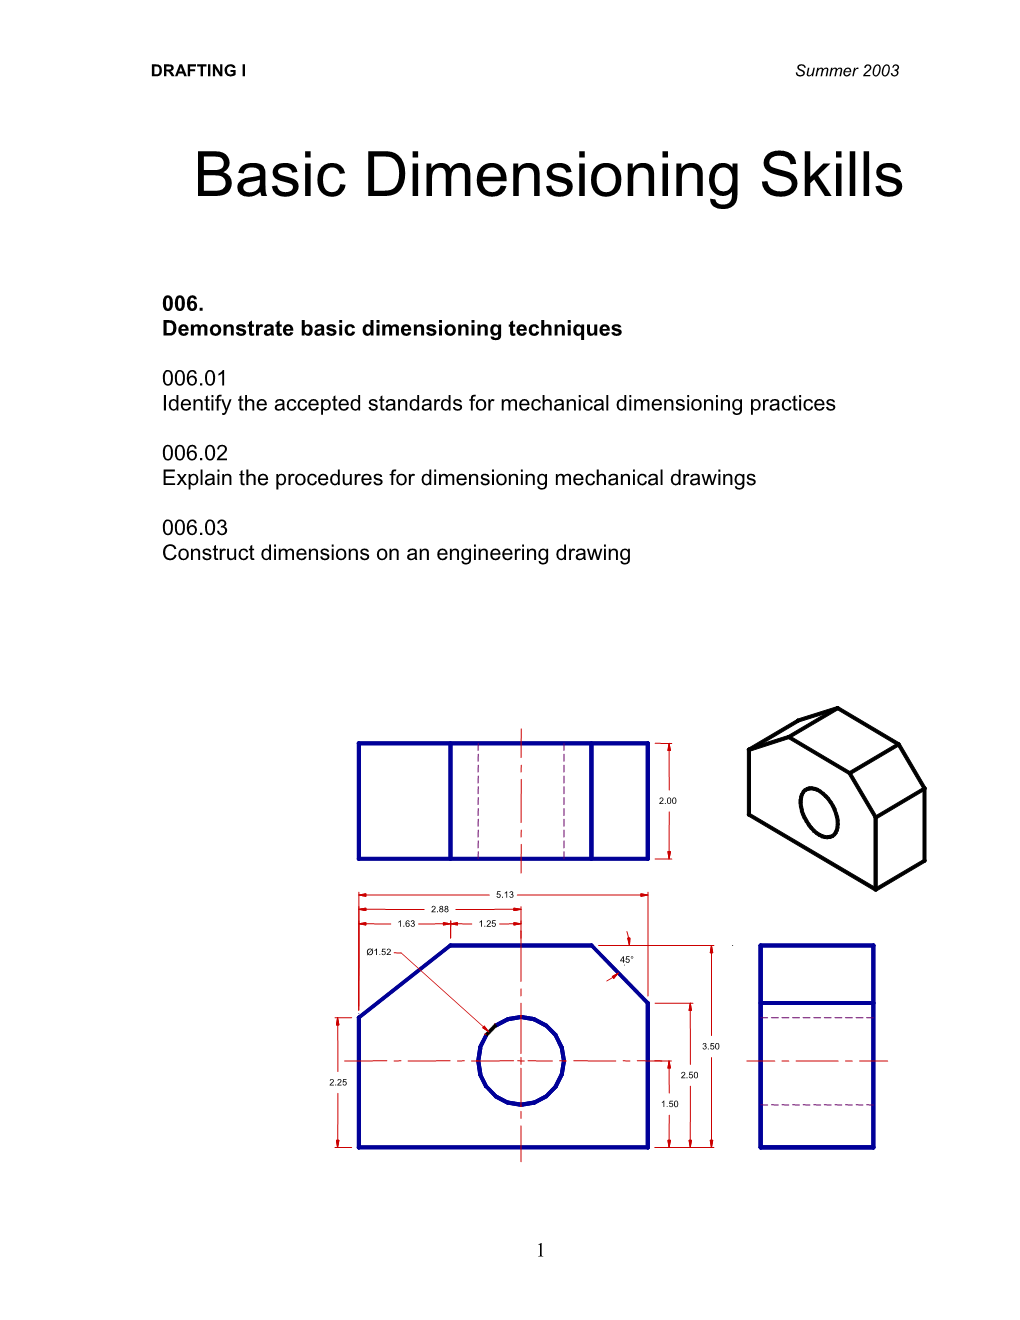 Demonstrate Basic Dimensioning Techniques